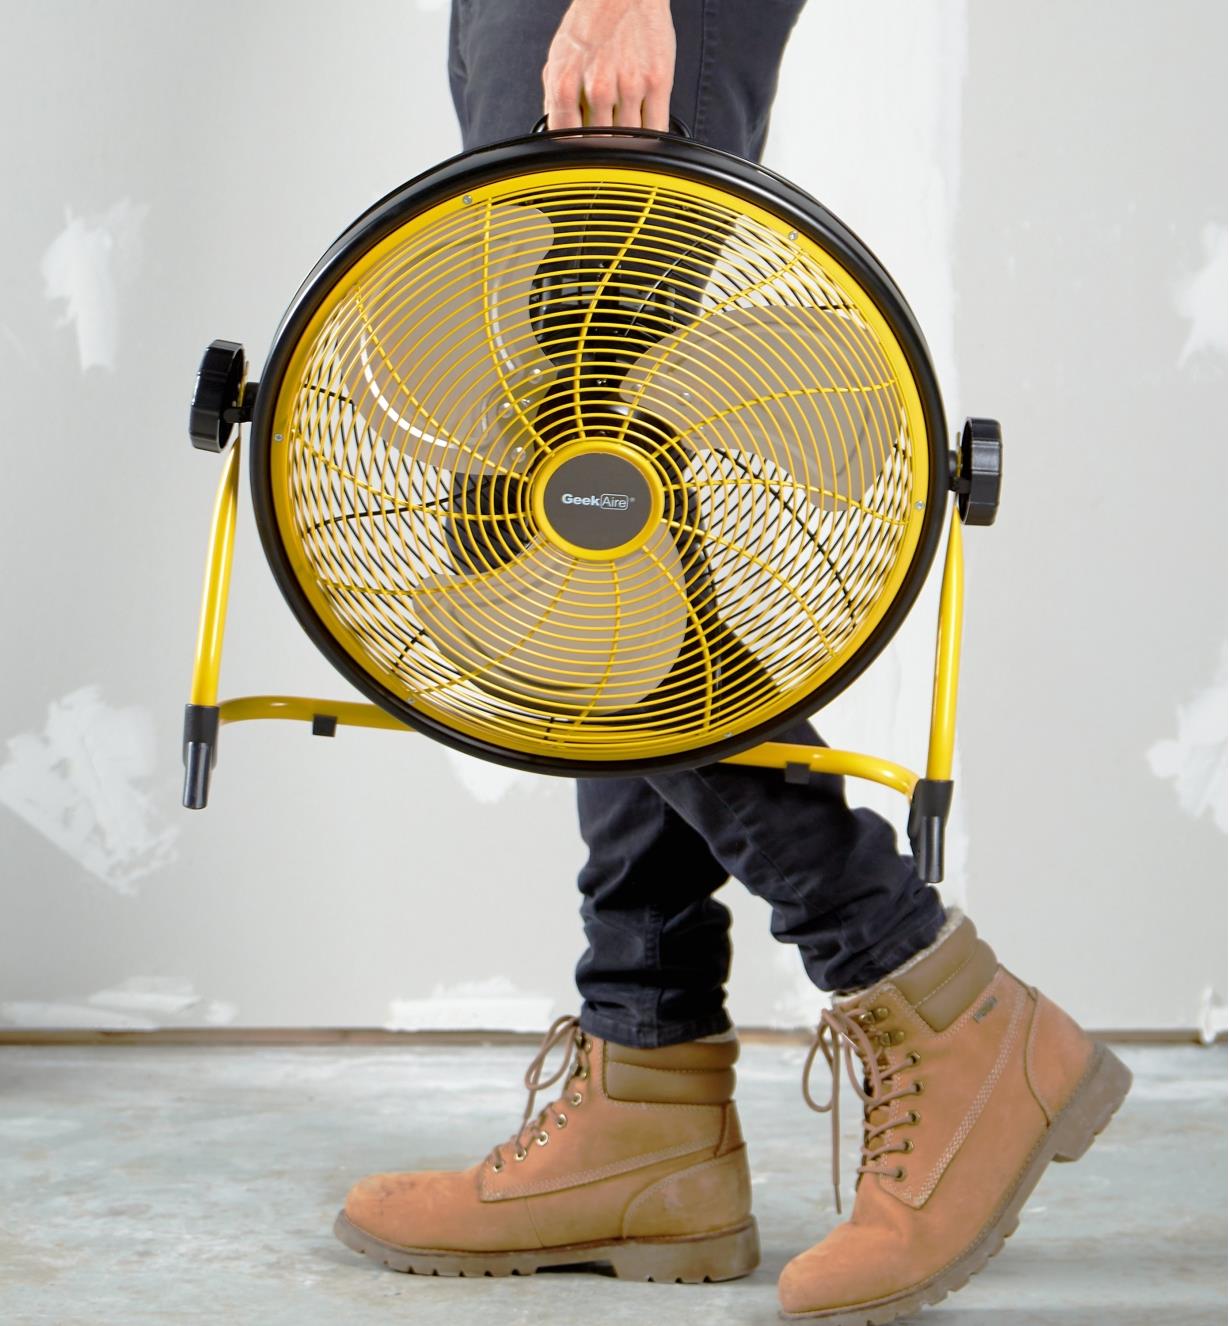 Carrying the rechargeable high-velocity fan with a built-in handle